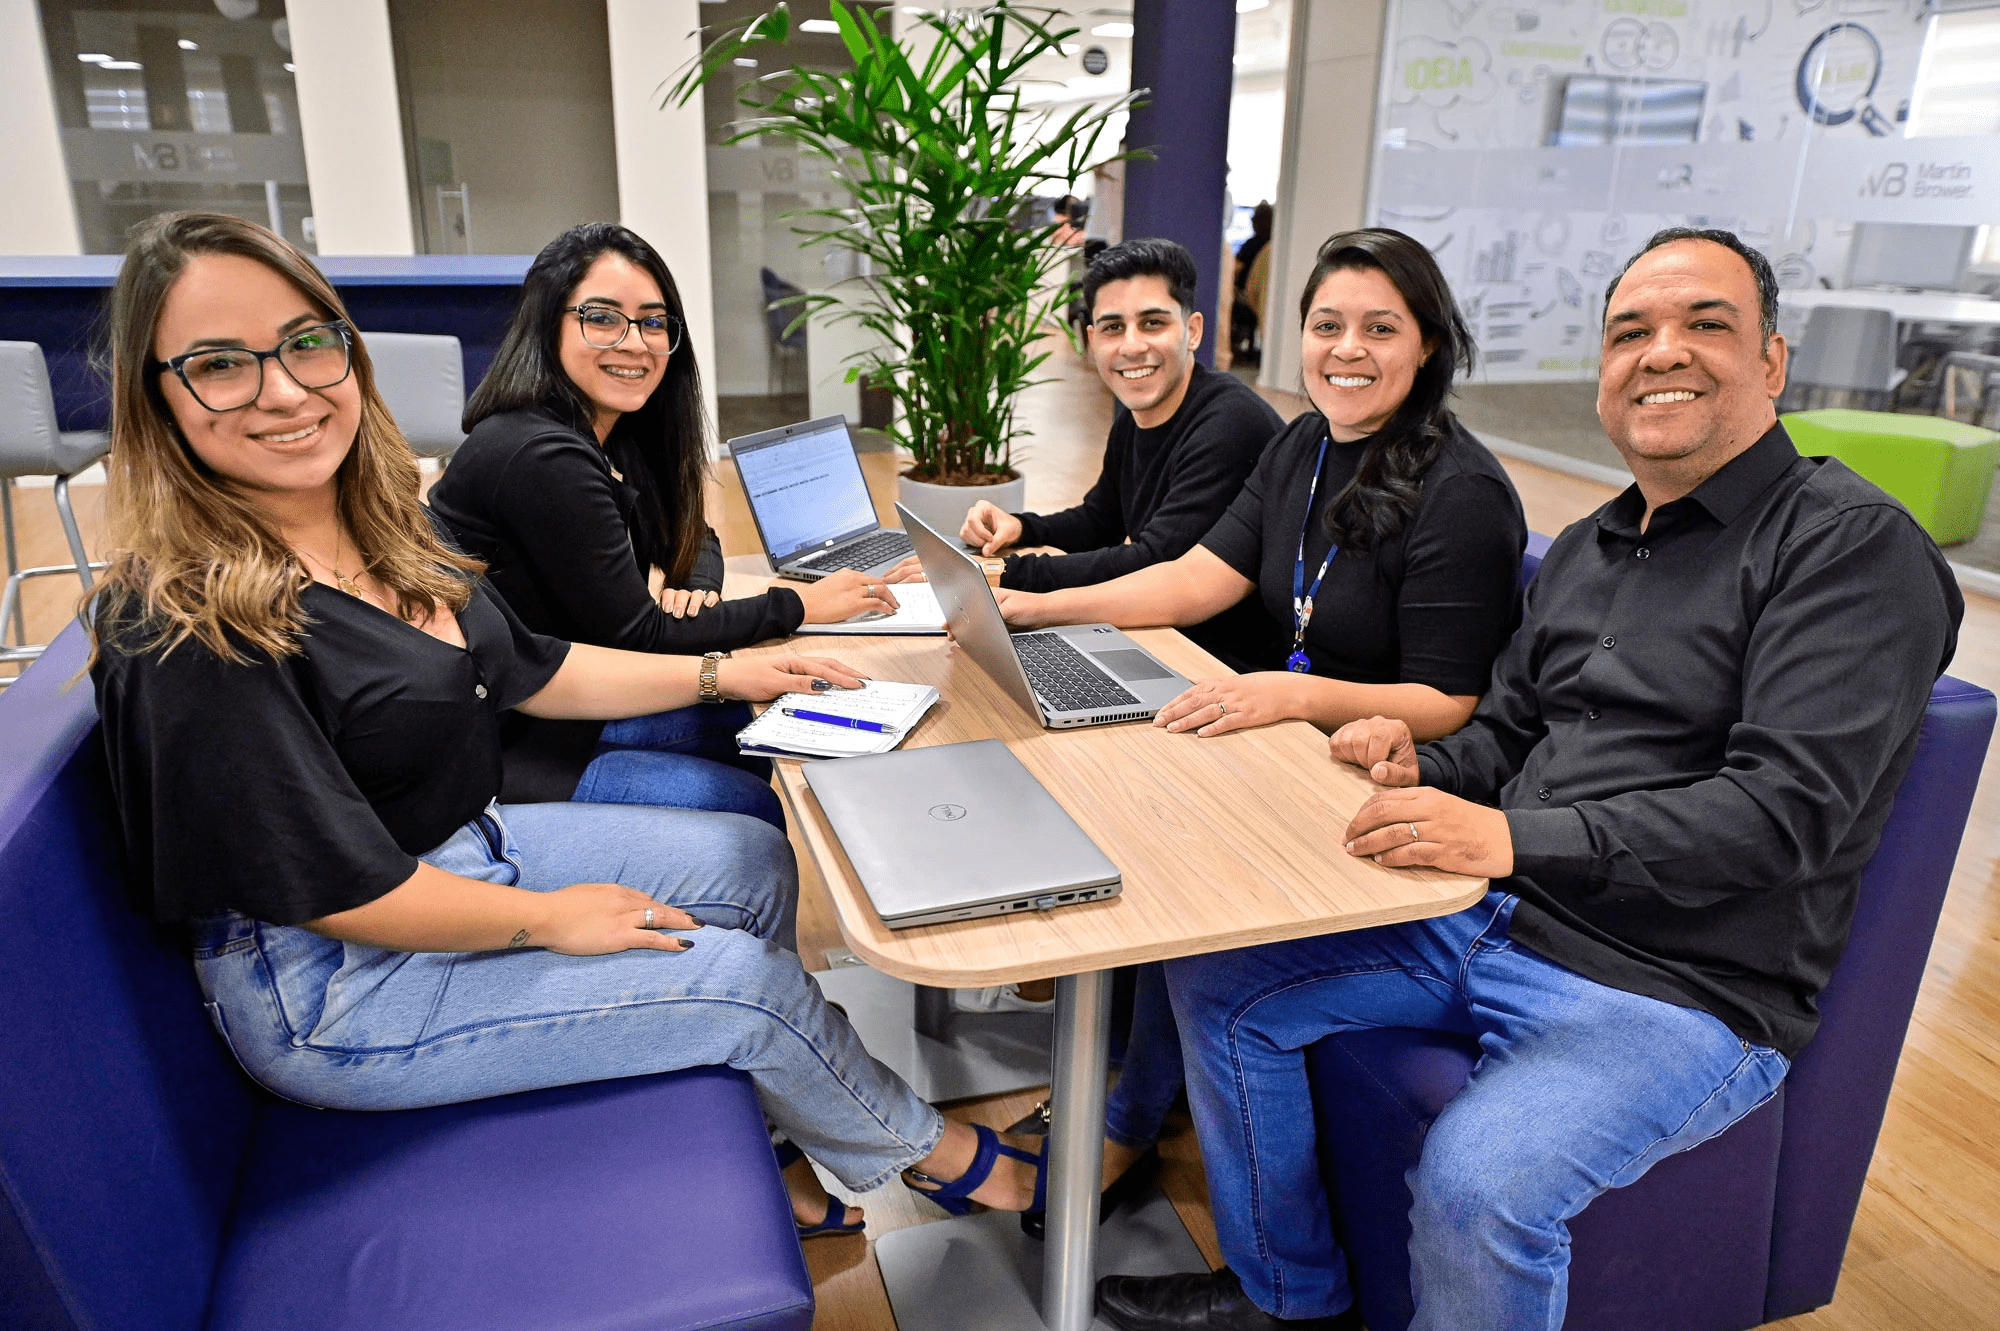 A group of smiling office workers in black shirts and white jeans sitting at a table and working on laptops